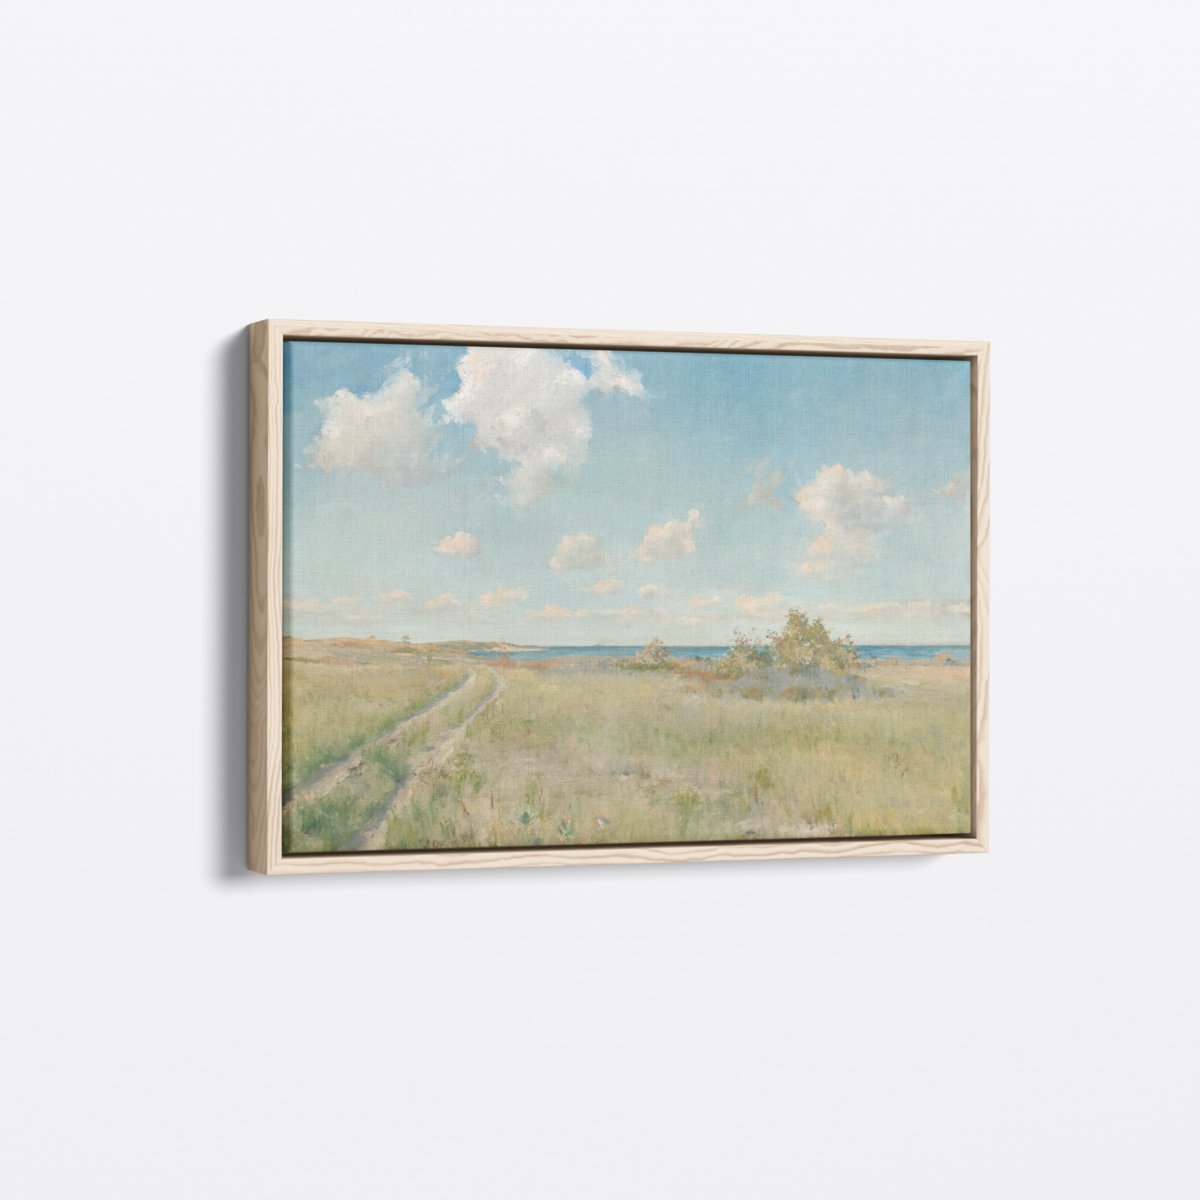 Old Road to the Sea | William Chase | Ave Legato | Canvas Art Prints | Vintage Artwork